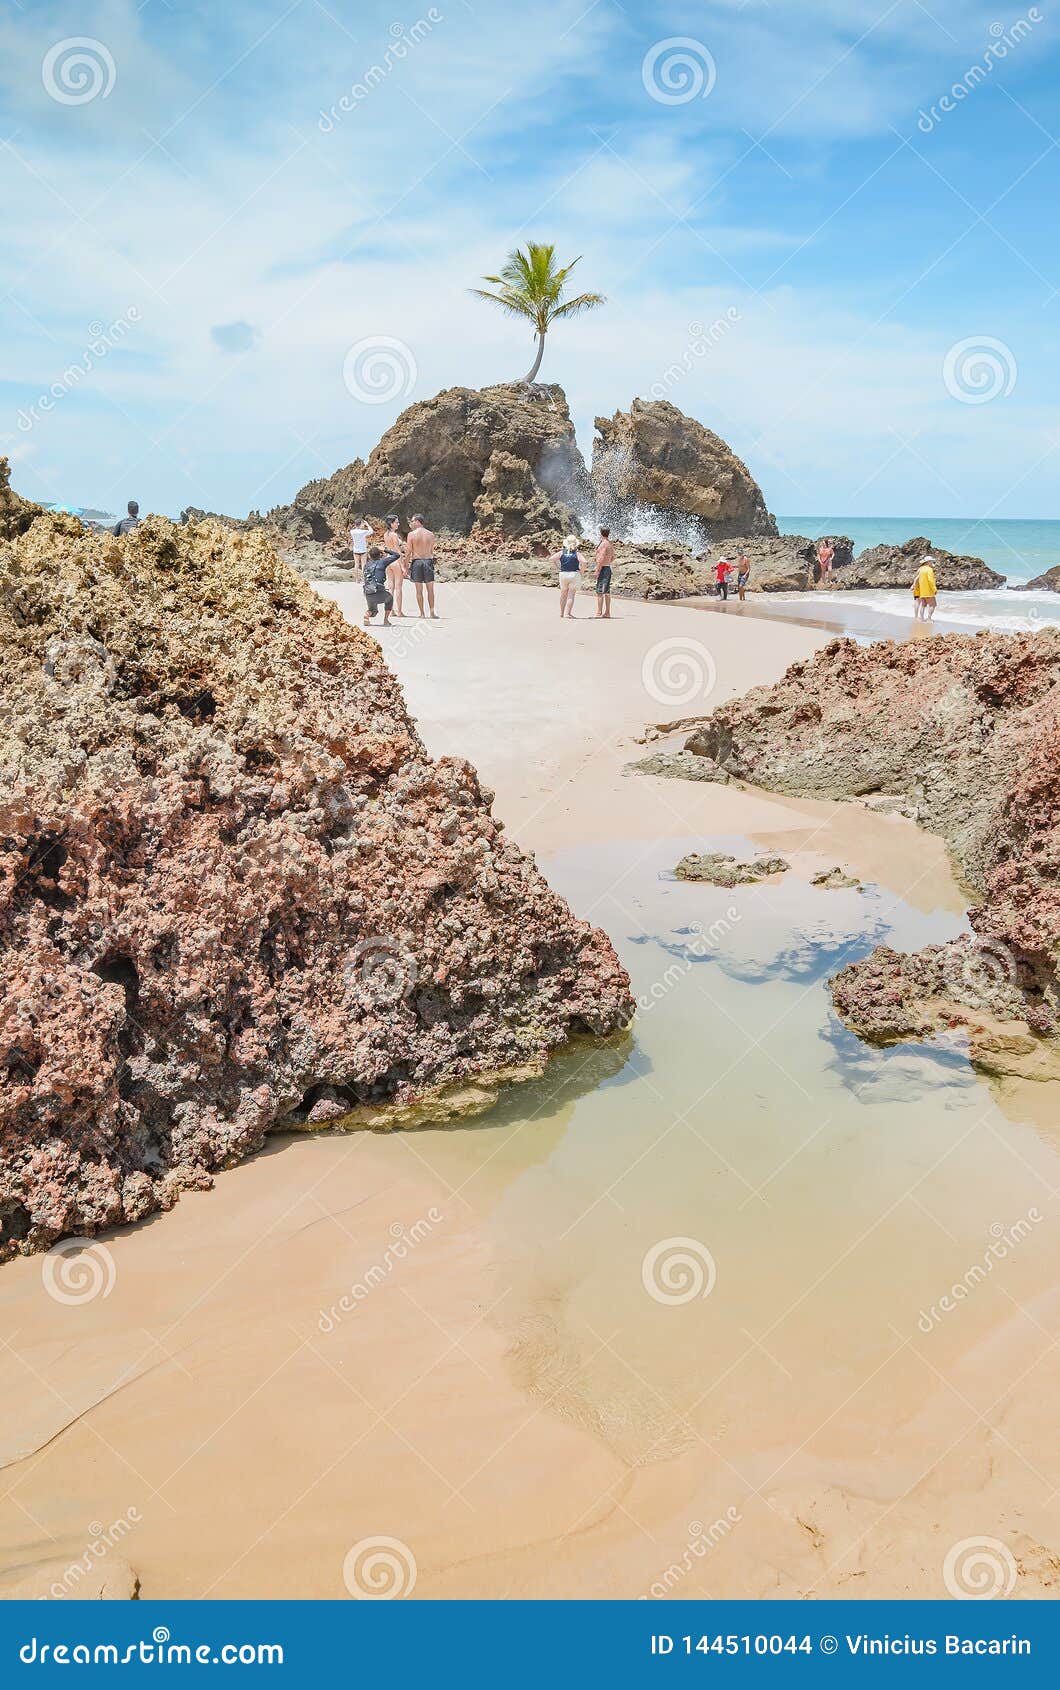 Tambaba Beach In Brazil Stock Images - Image: 19057044